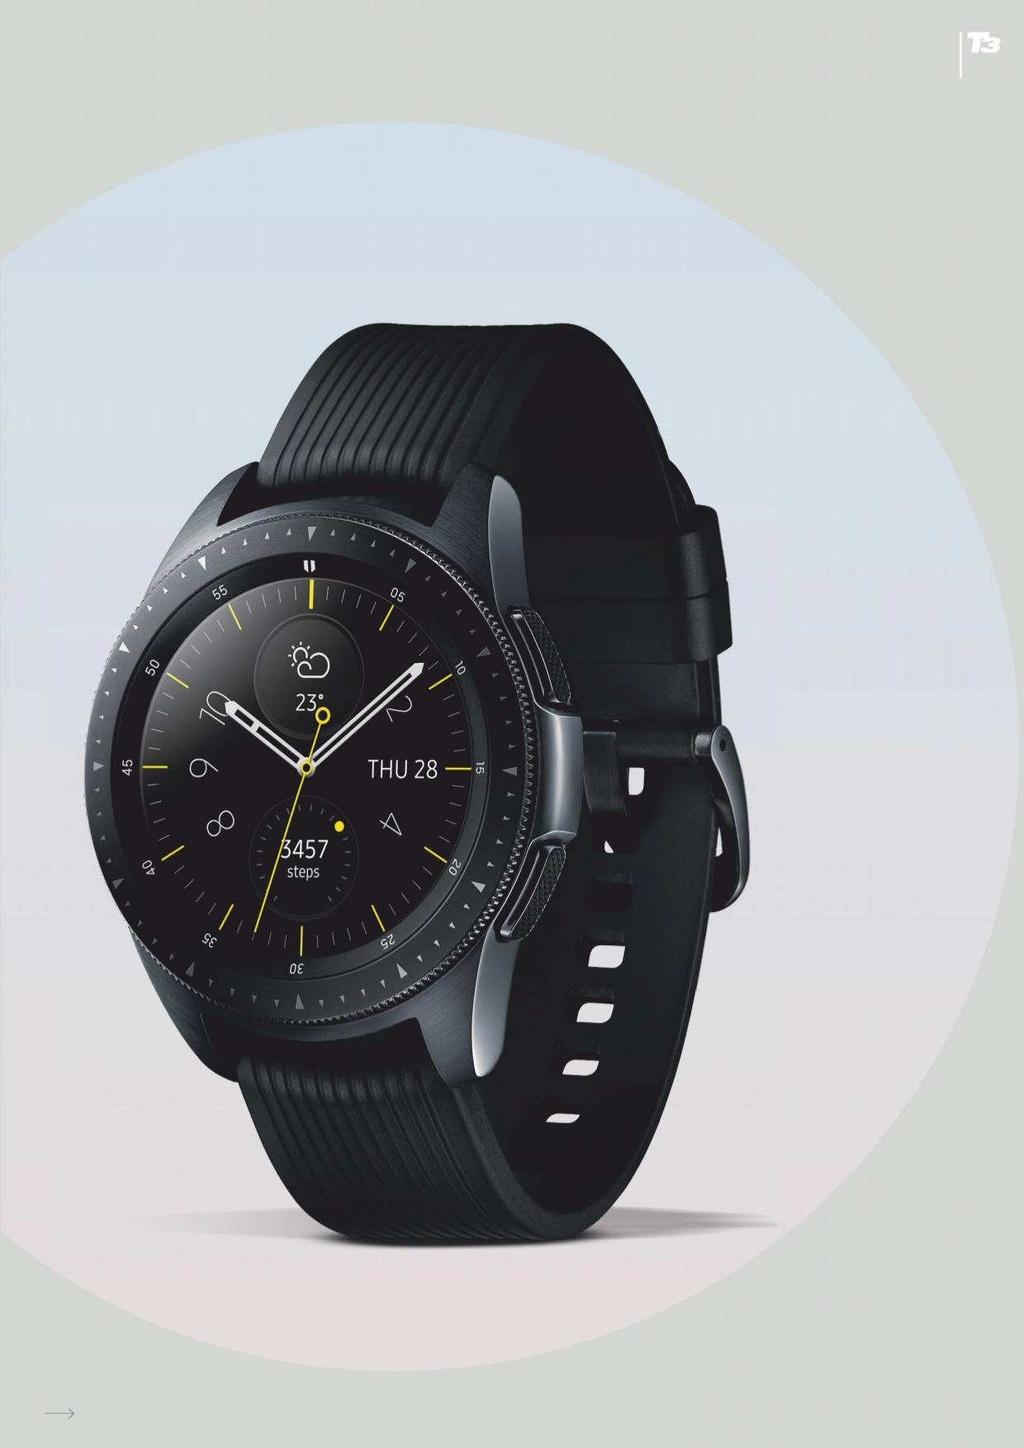 Always on, all the time An Always On Watch, there s no need to press a button or turn the bezel on Galaxy Watch to show the time.